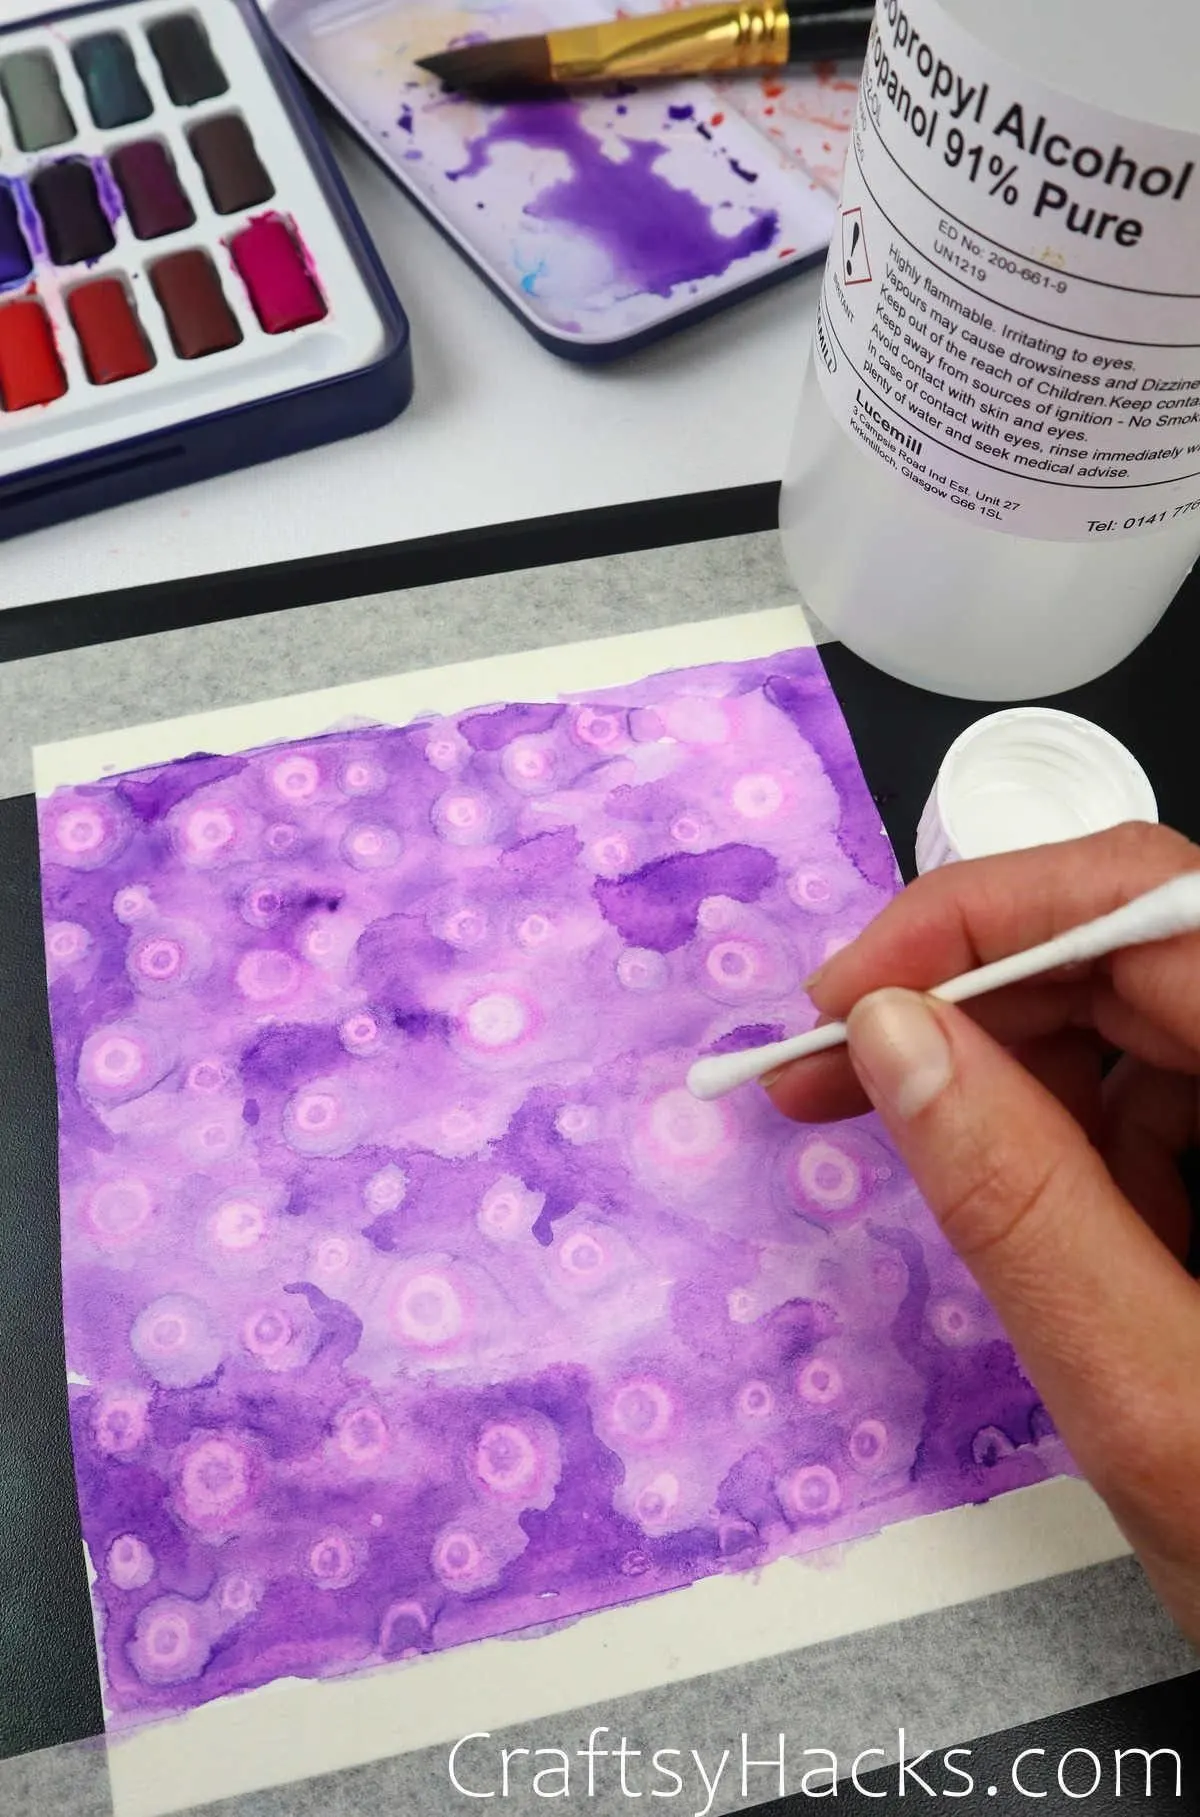 dot your painting with alcohol